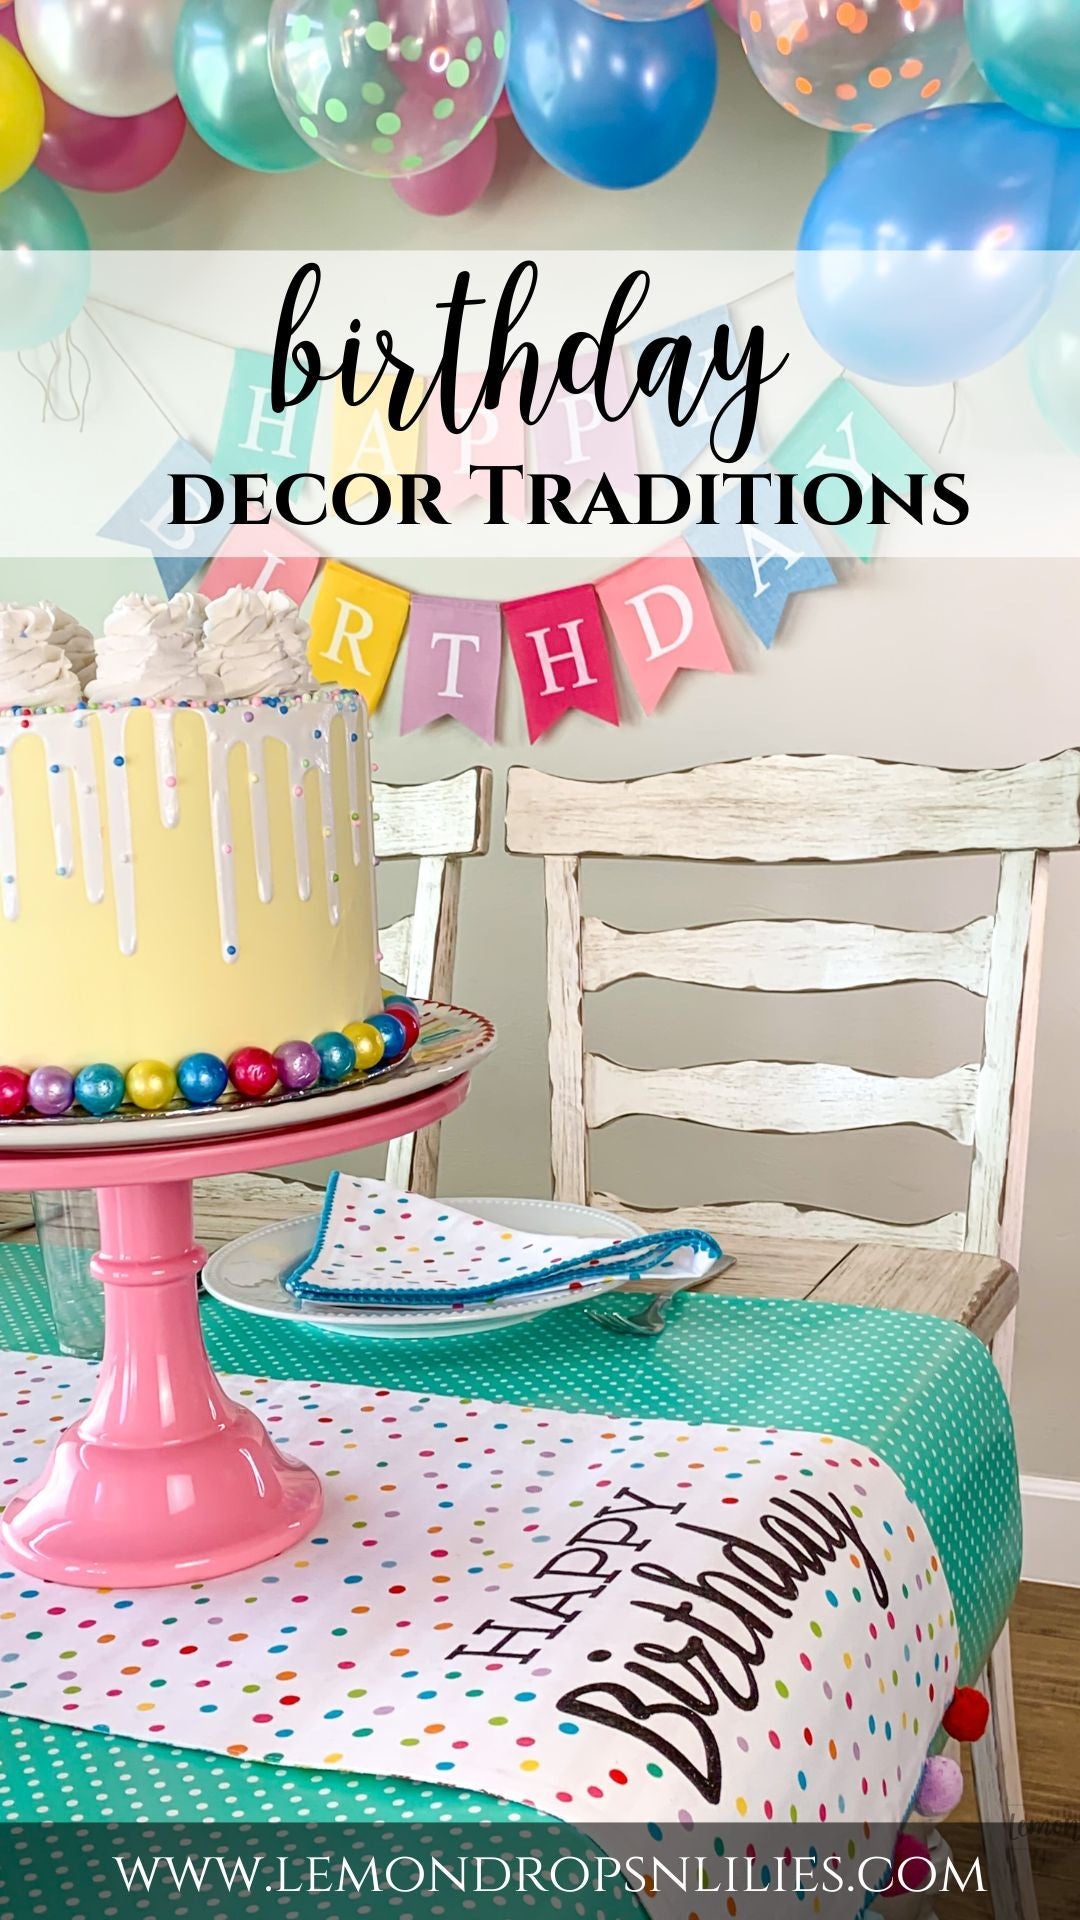 Pin on Cake : Party Ideas